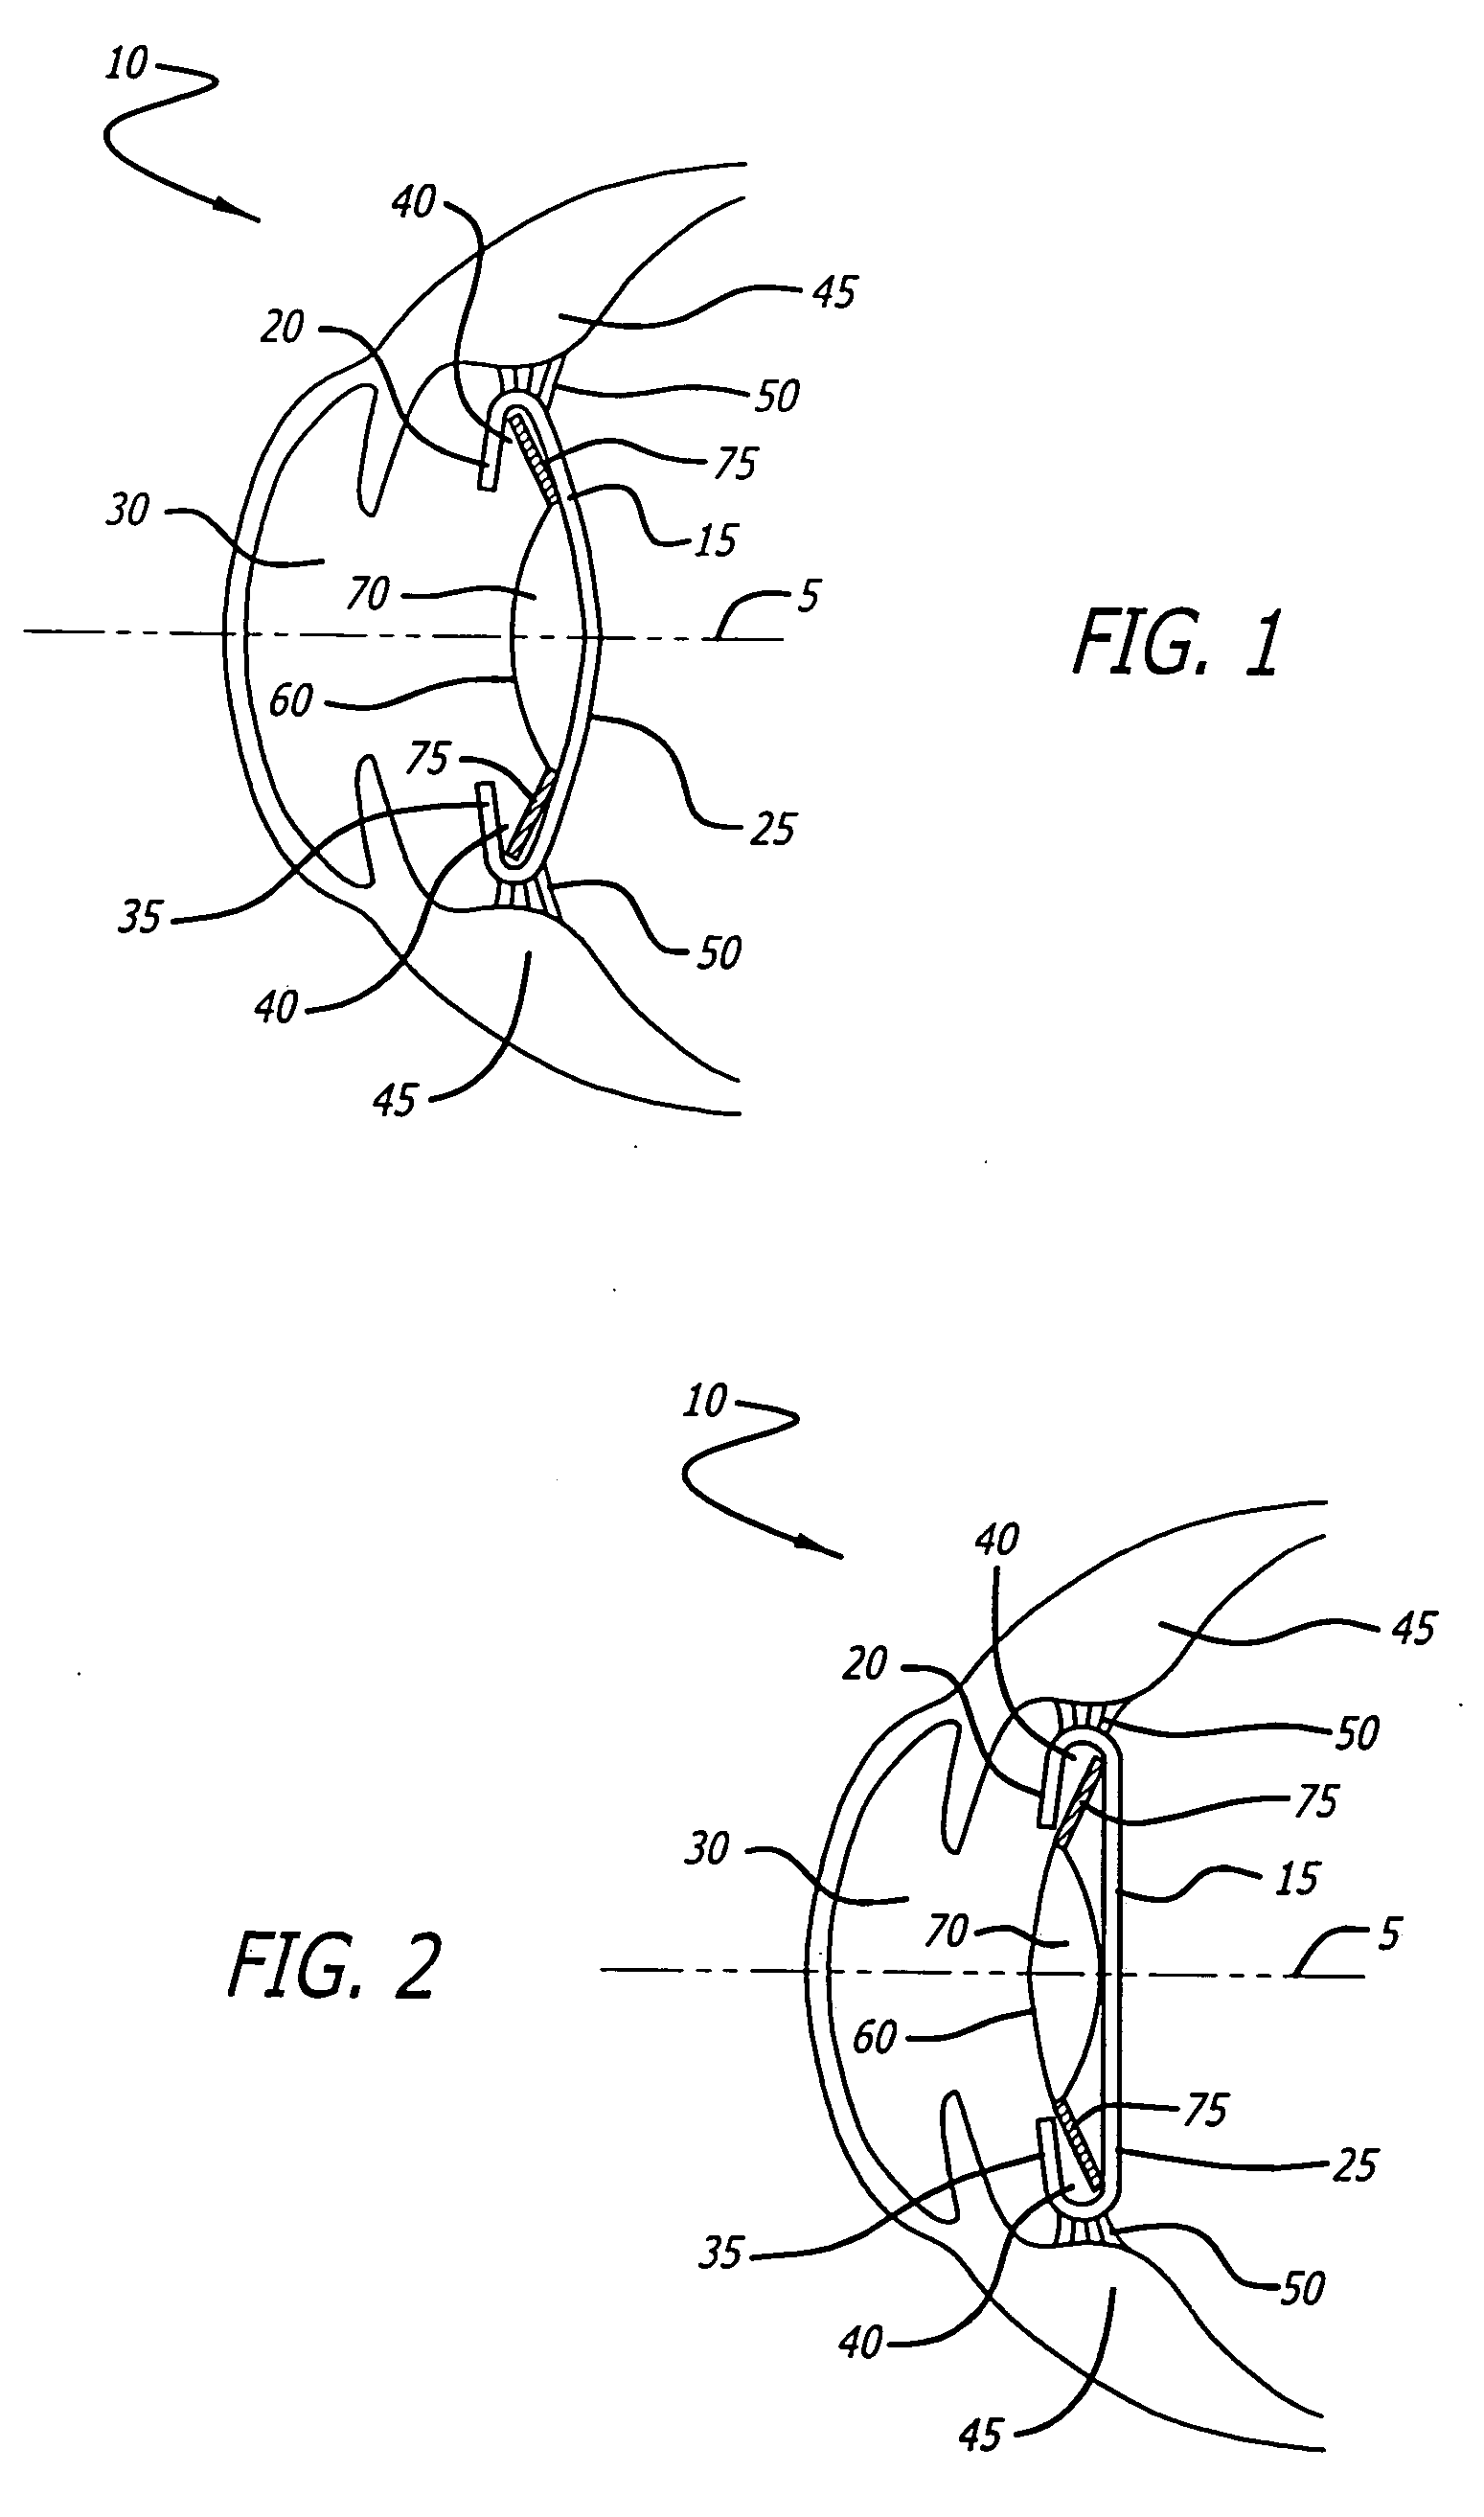 Accommodating intraocular lens with textured haptics